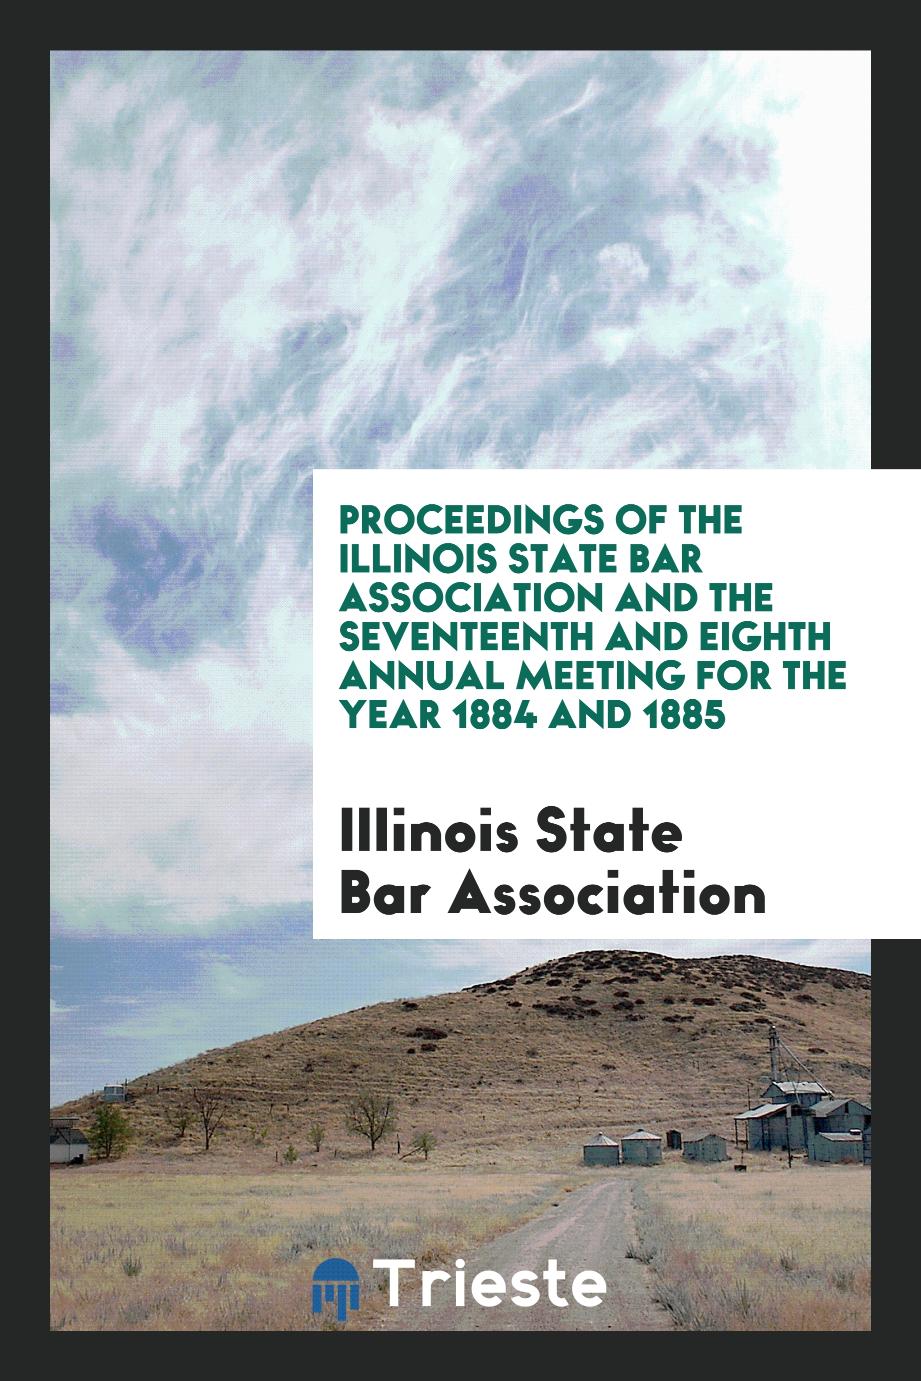 Proceedings of the Illinois State Bar Association and the Seventeenth and Eighth Annual Meeting for the Year 1884 and 1885